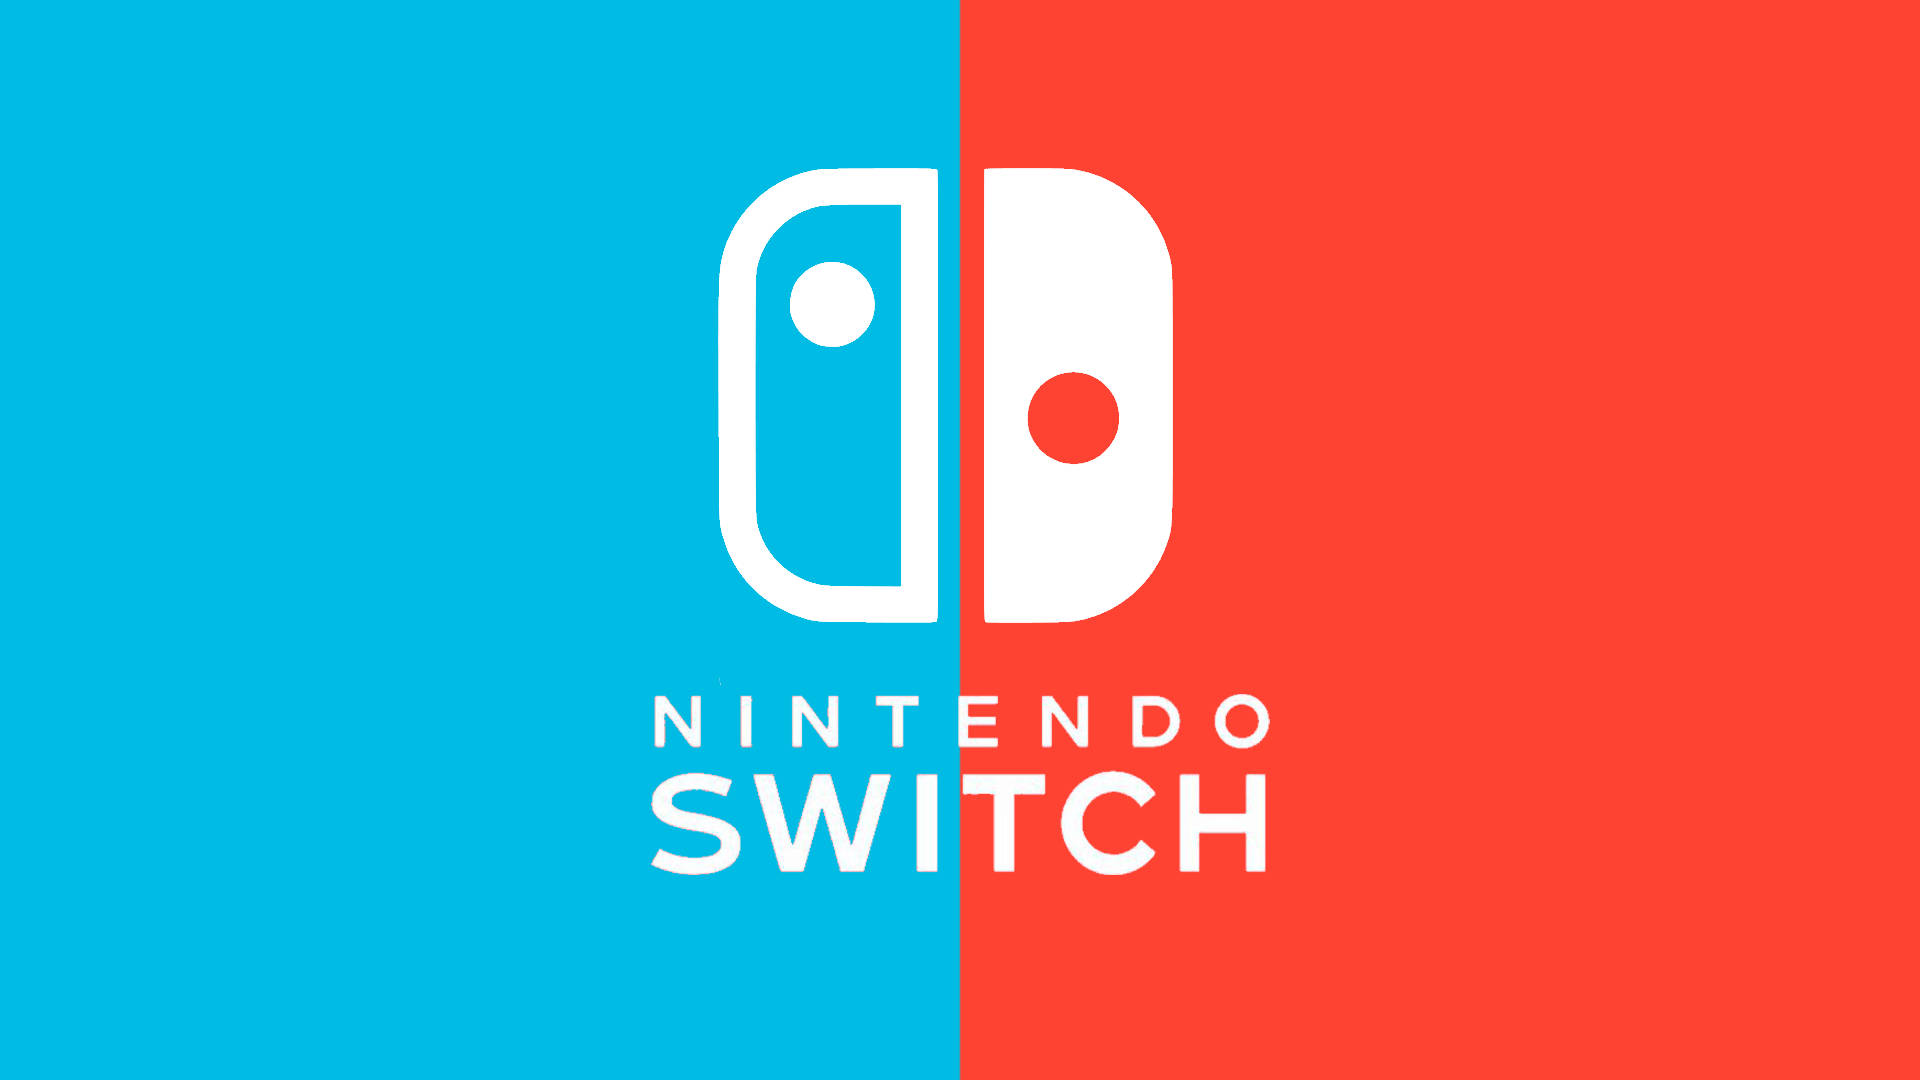 Nintendo Switch Product Key or Gift Card Activation